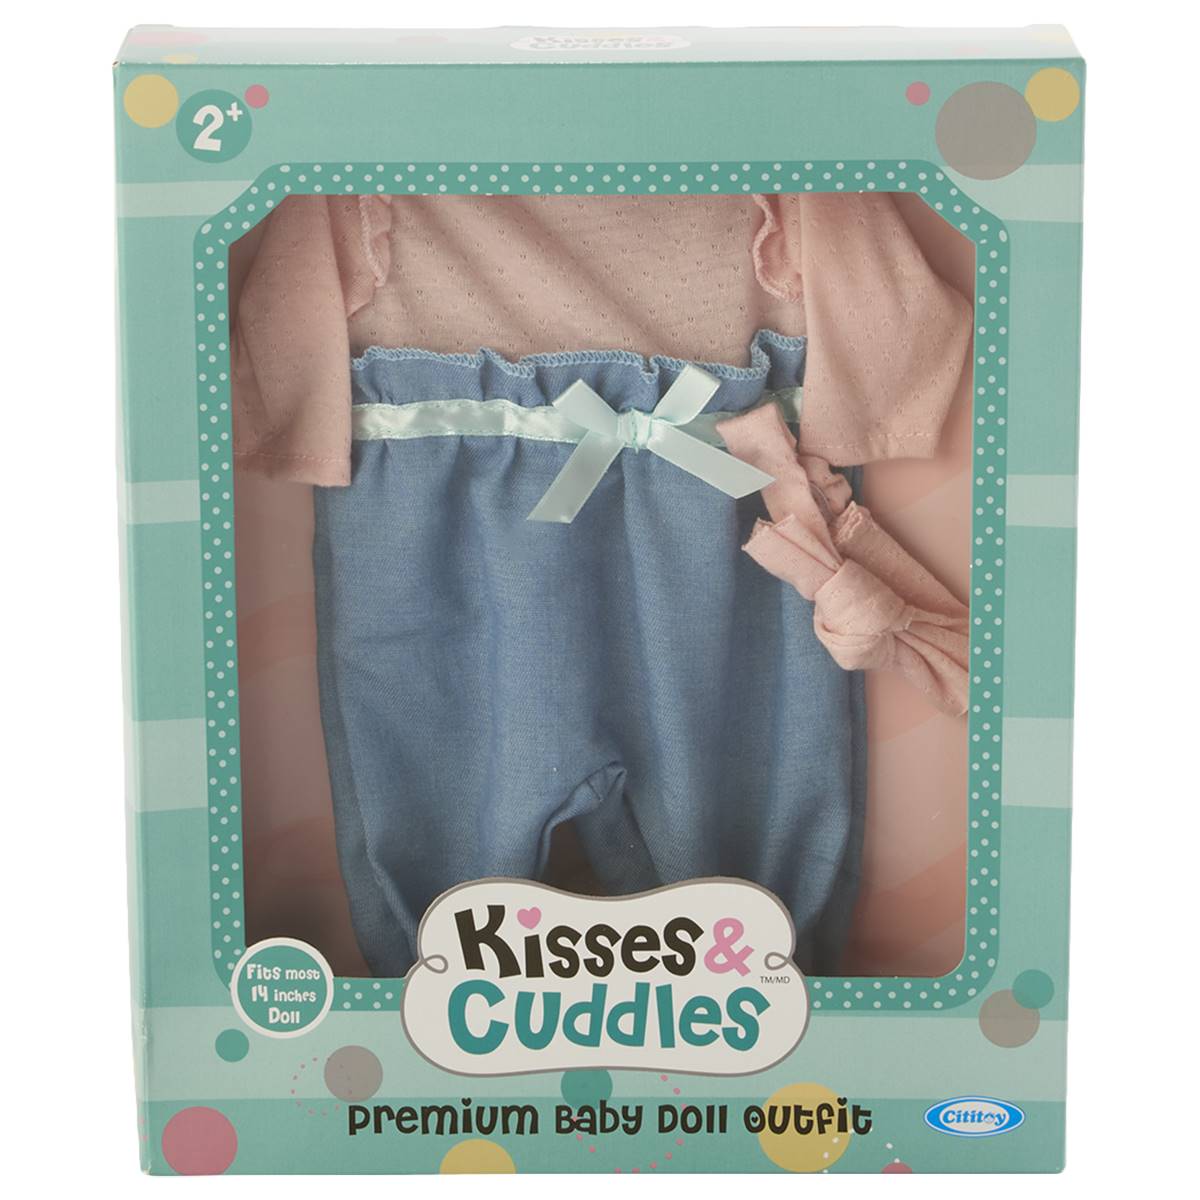 Kisses & Cuddles Premium Baby Doll Outfit